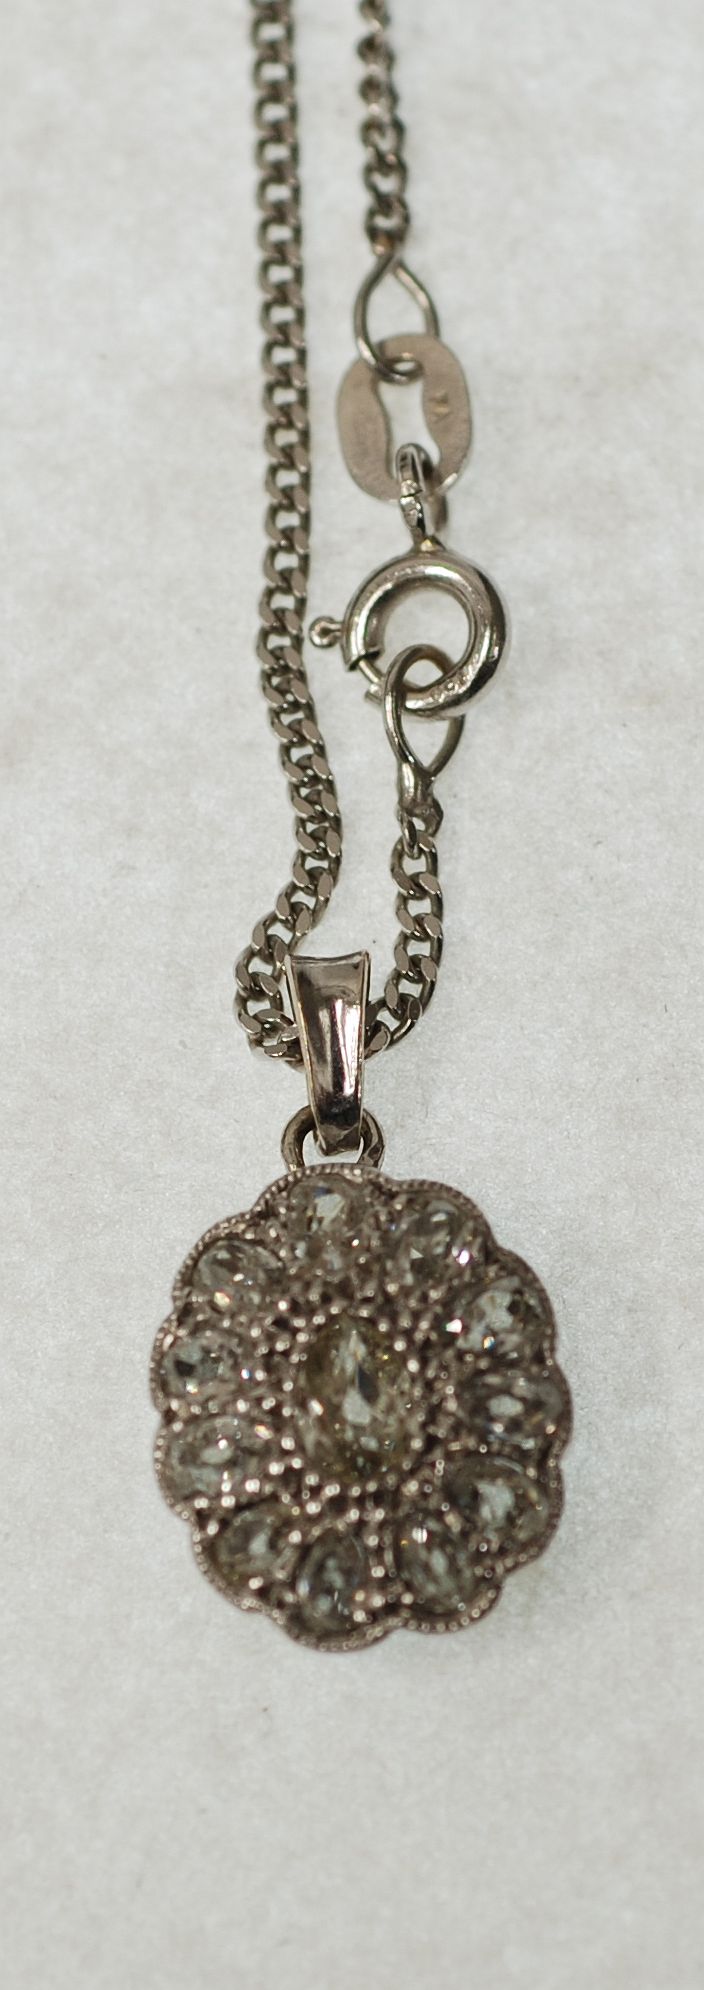 DIAMOND SET CLASP, CONVERTED TO A PENDANT, milgrain set with central pear cut diamond with a